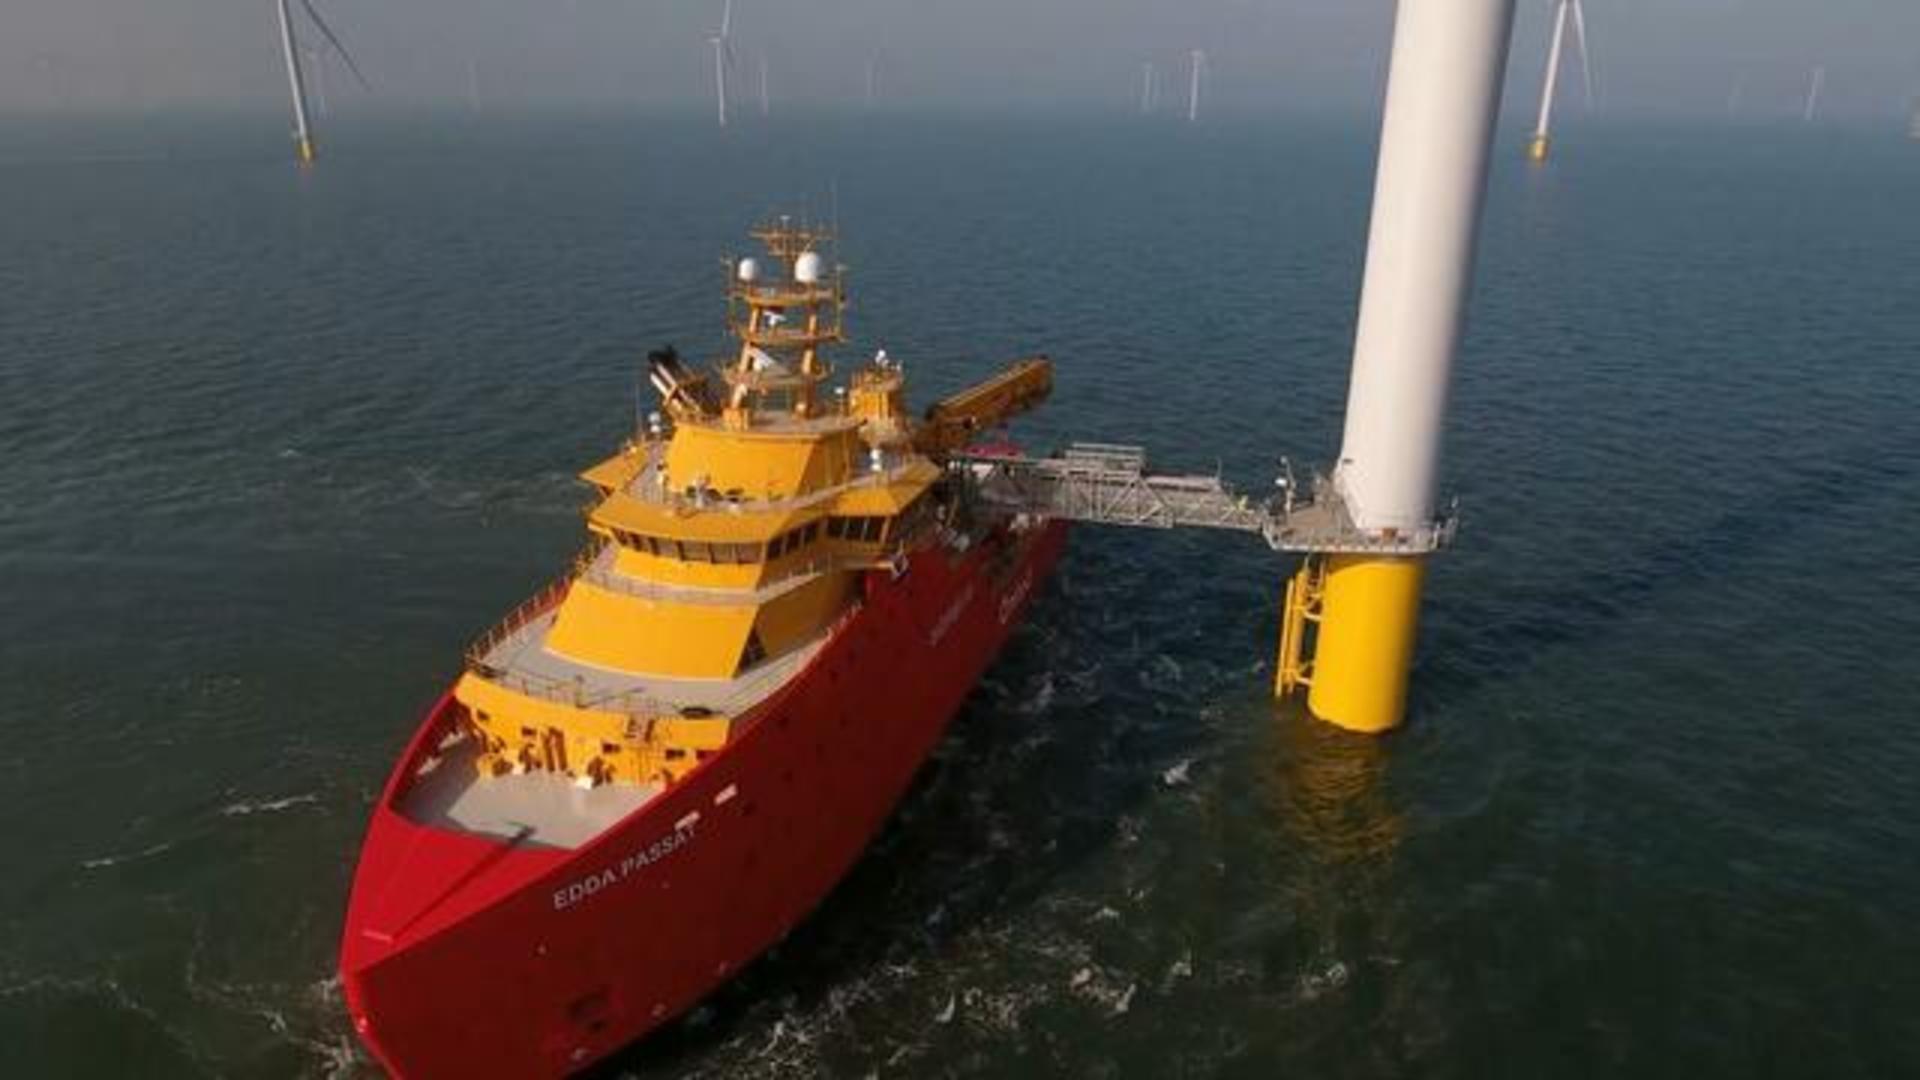 First American ship for offshore windfarms takes shape - CBS News